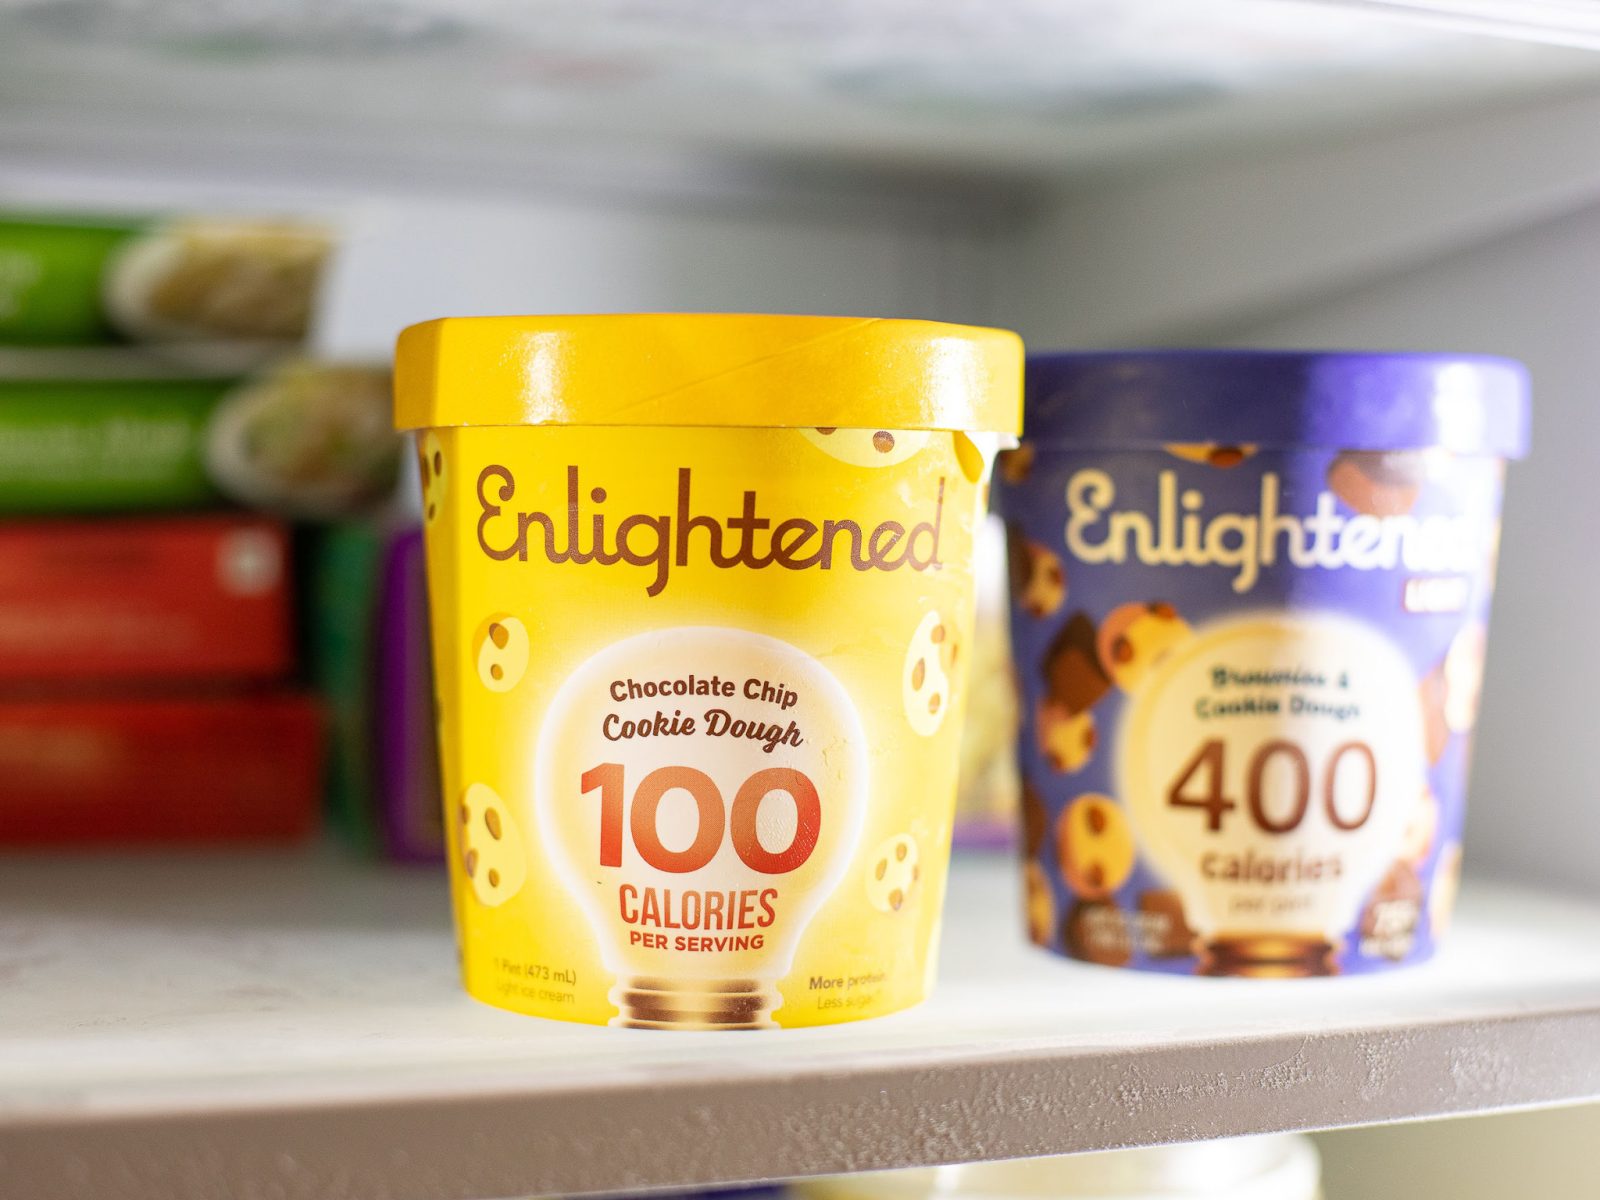 Enlightened Ice Cream As Low As $1.78 At Publix (Regular Price $6.89)